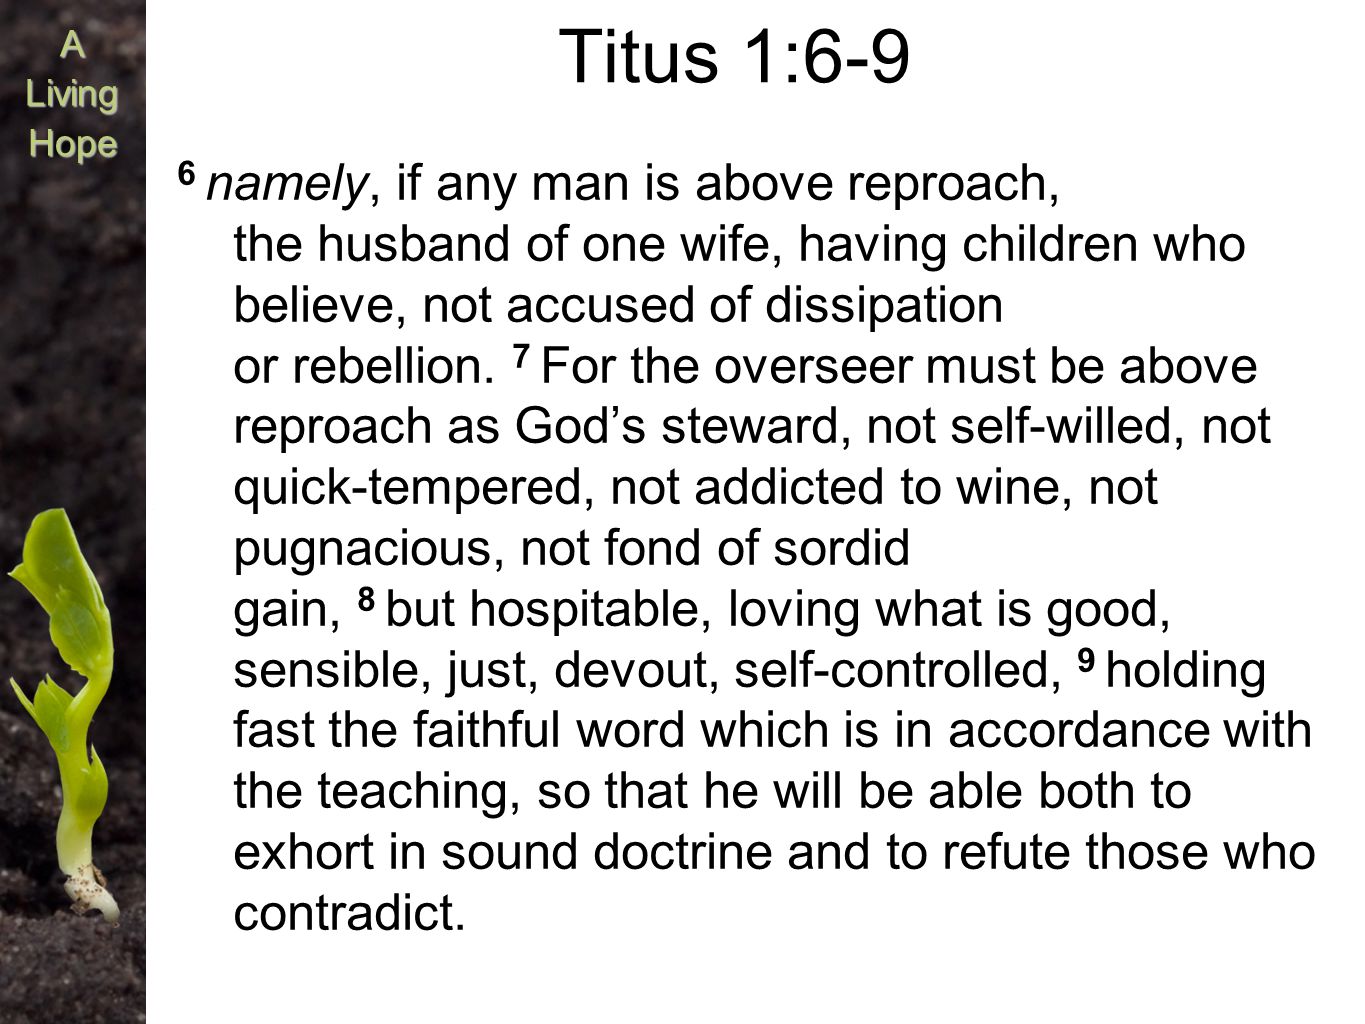 A Titus 1:6-9 6 namely, if any man is above reproach, the husband of one wife, having children who believe, not accused of dissipation or rebellion.